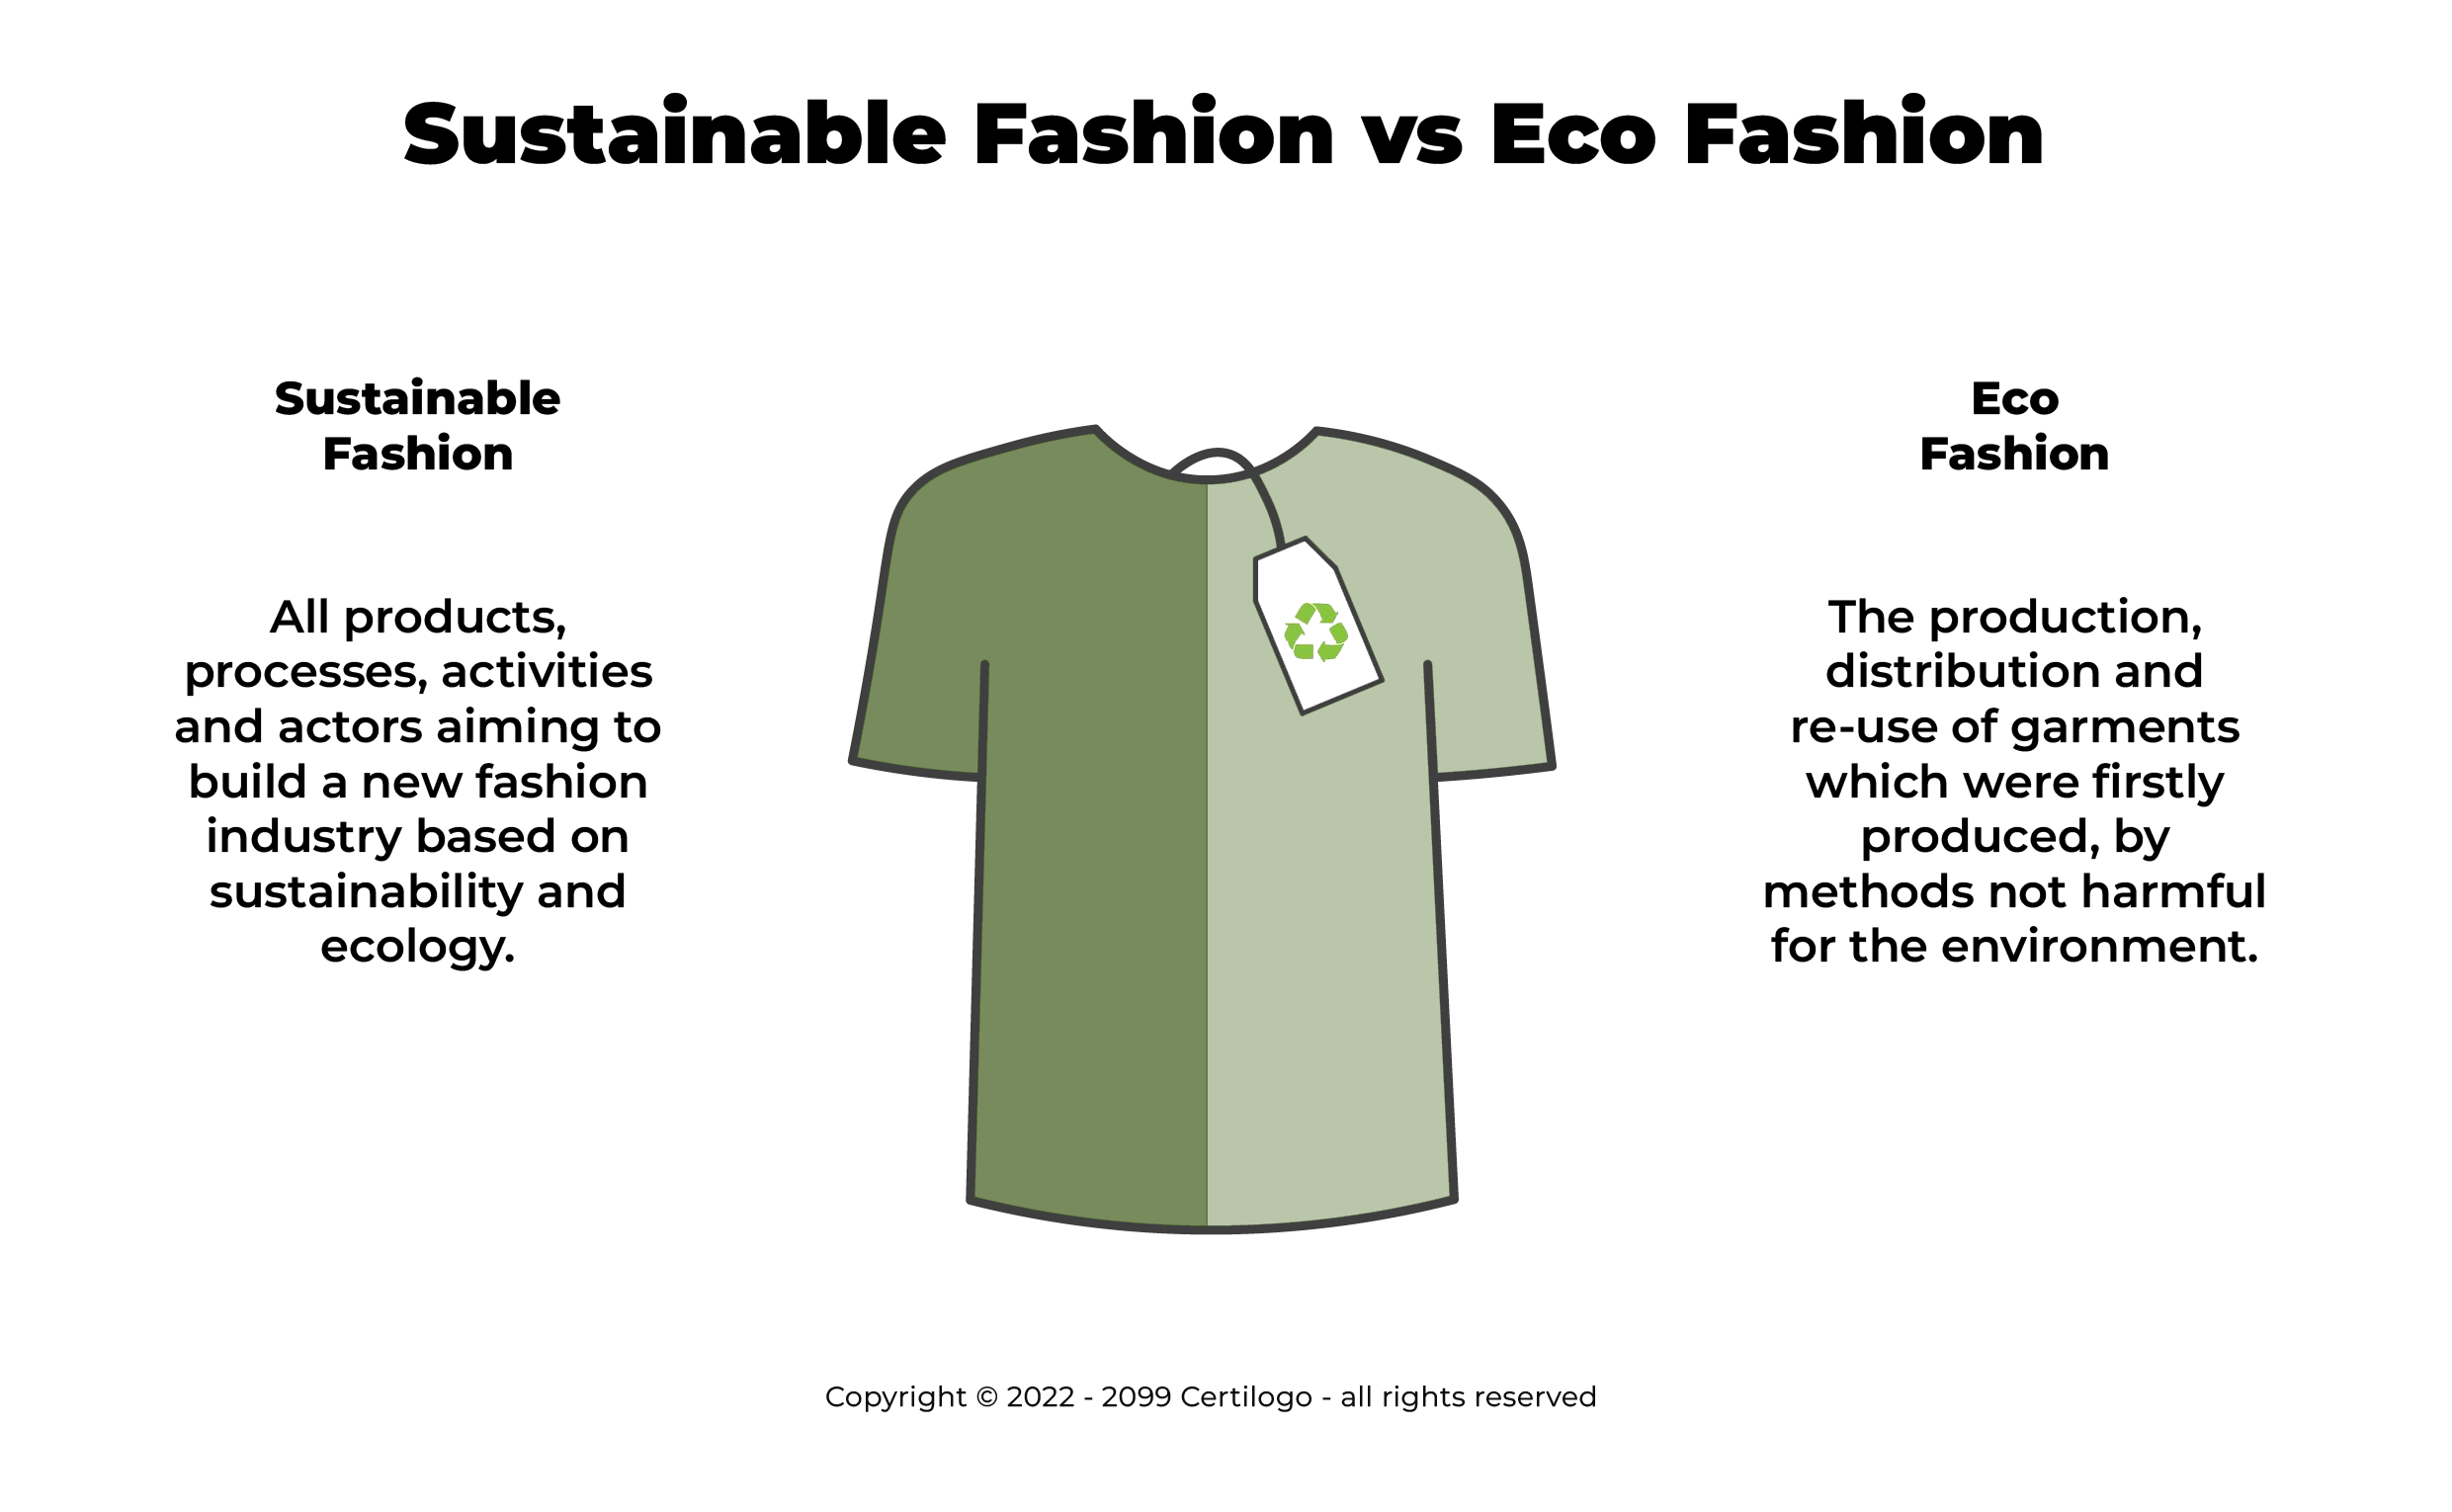 What's the difference between sustainable fashion and eco fashion?